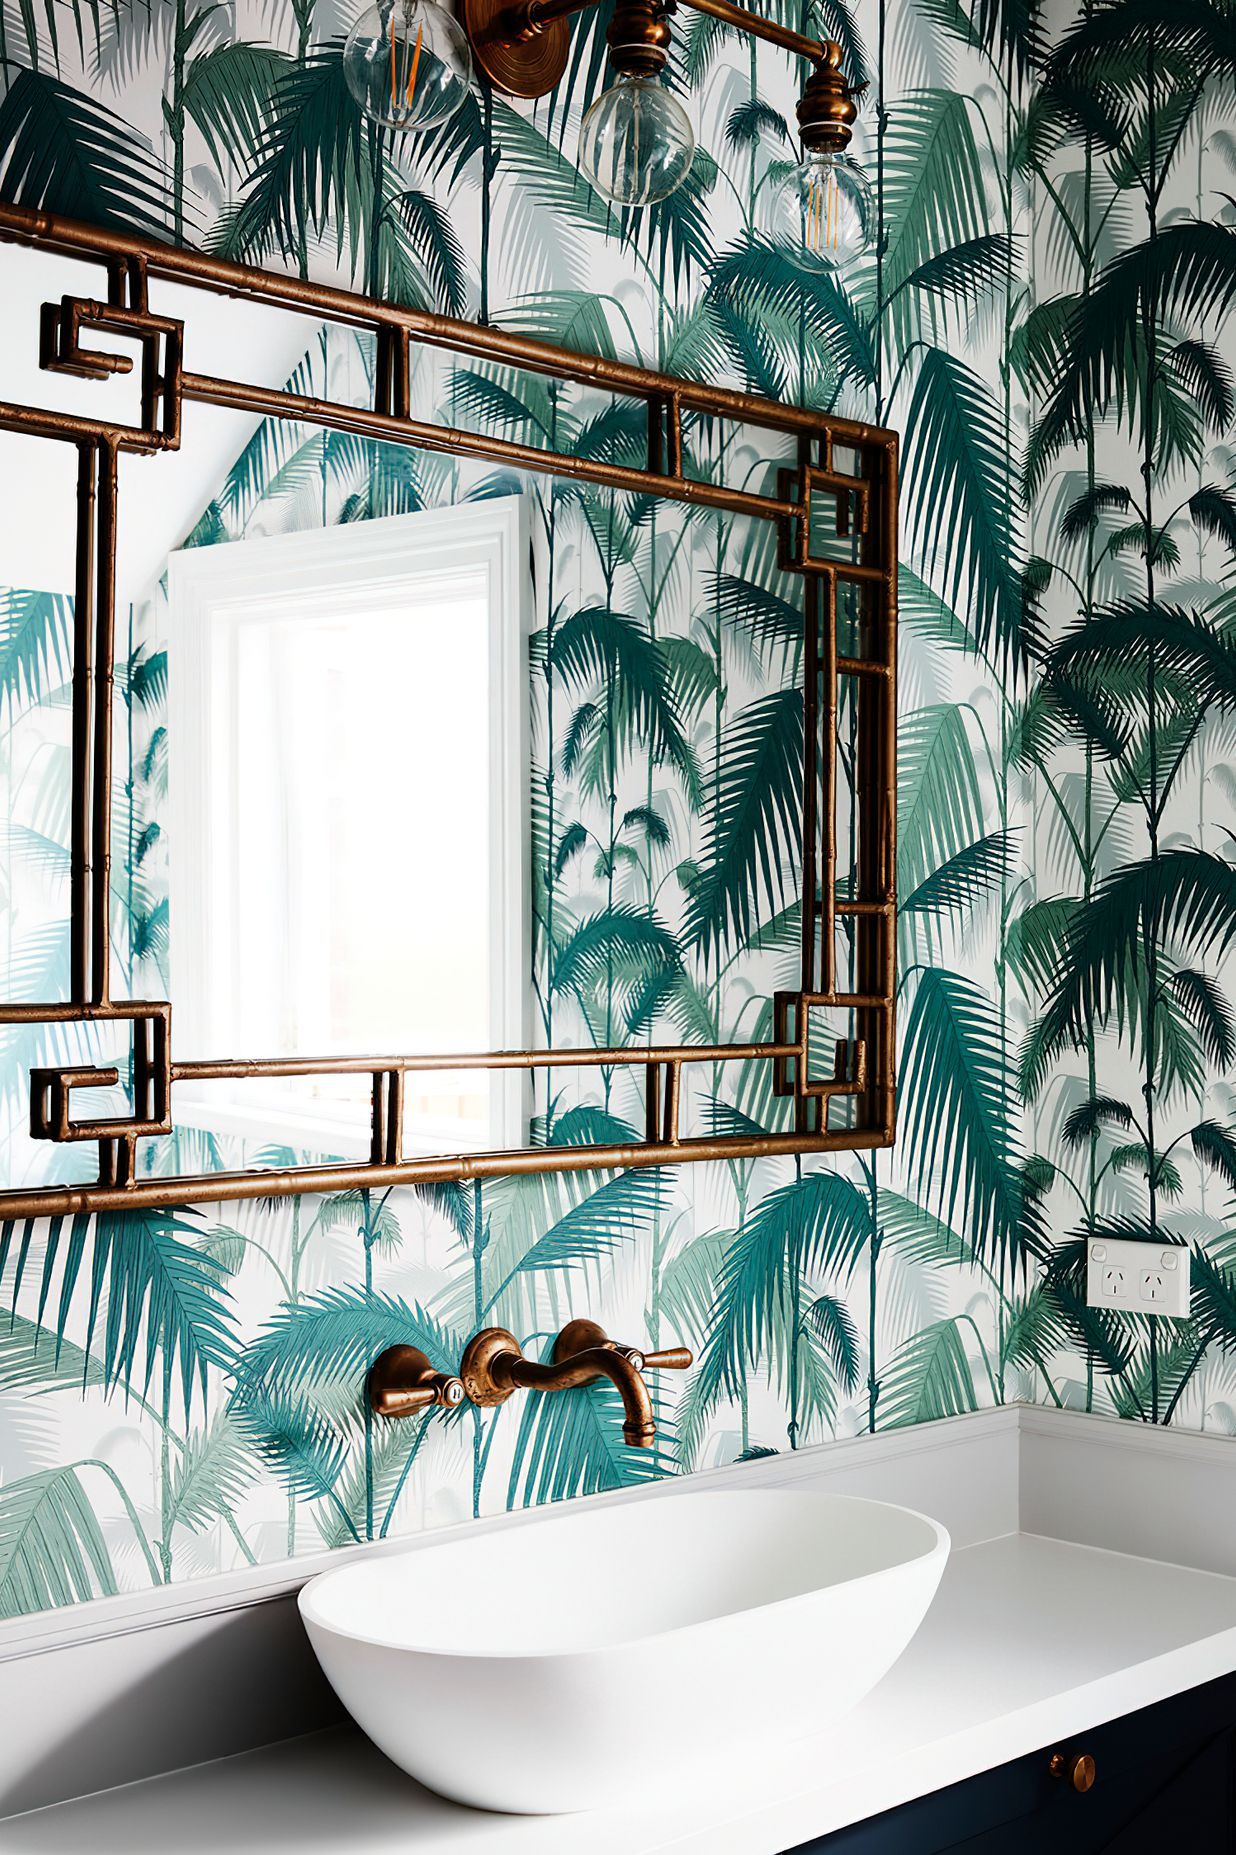 BAMBOO FRAMED MIRROR - This bamboo framed mirror had to be specially hung due to its great weight.  A fantastic hint of British colonial style in this powder room.